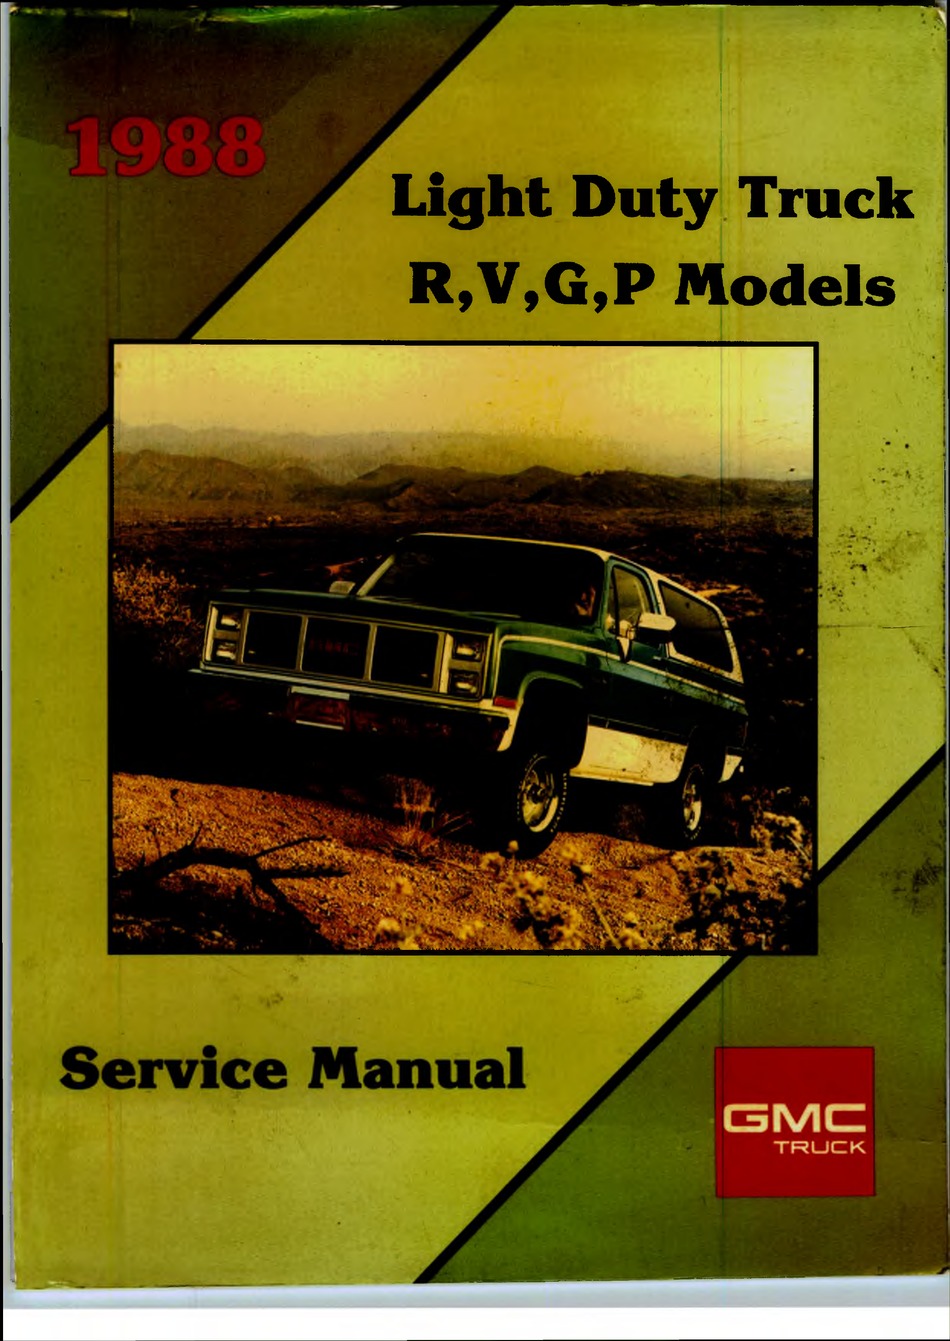 1999 Chevy GMC P32/42 Chassis Motor Home Service Shop Repair Manual GM FACTORY 